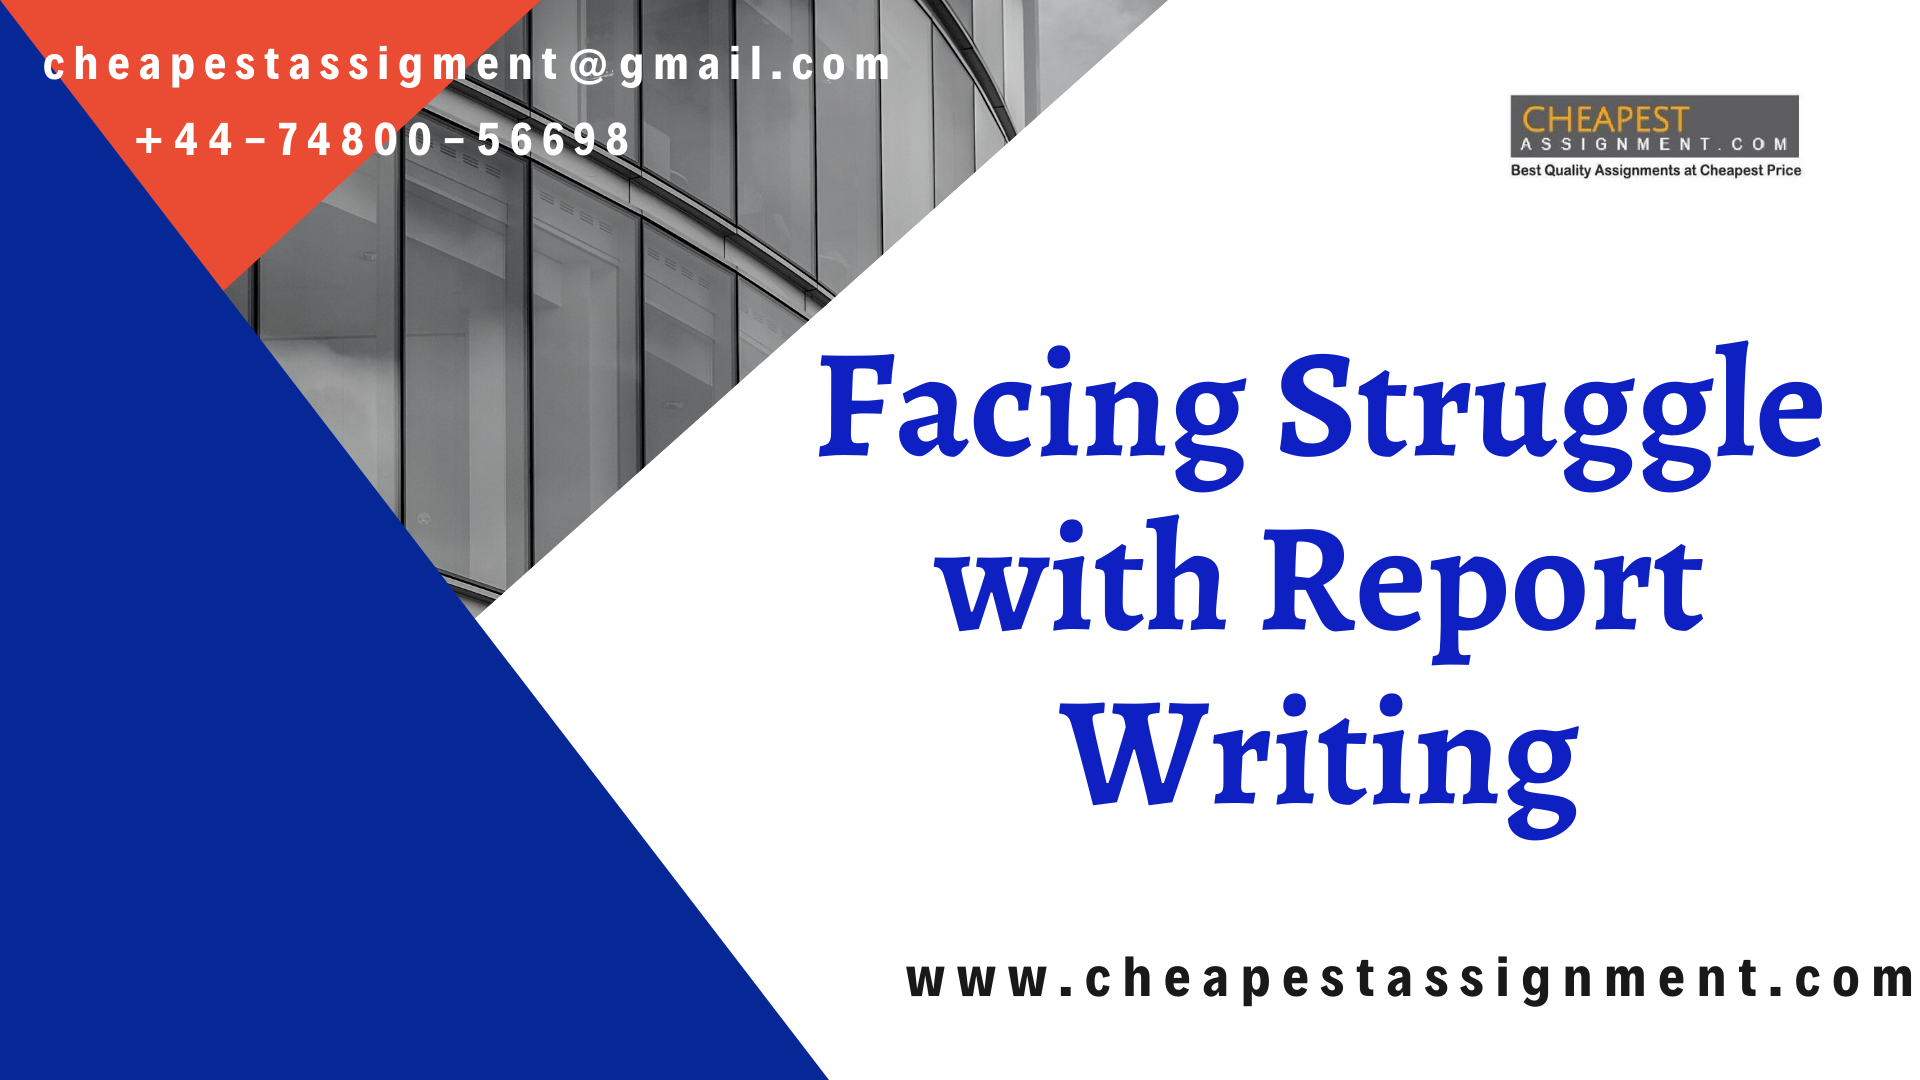 Facing Struggle with Report Writing